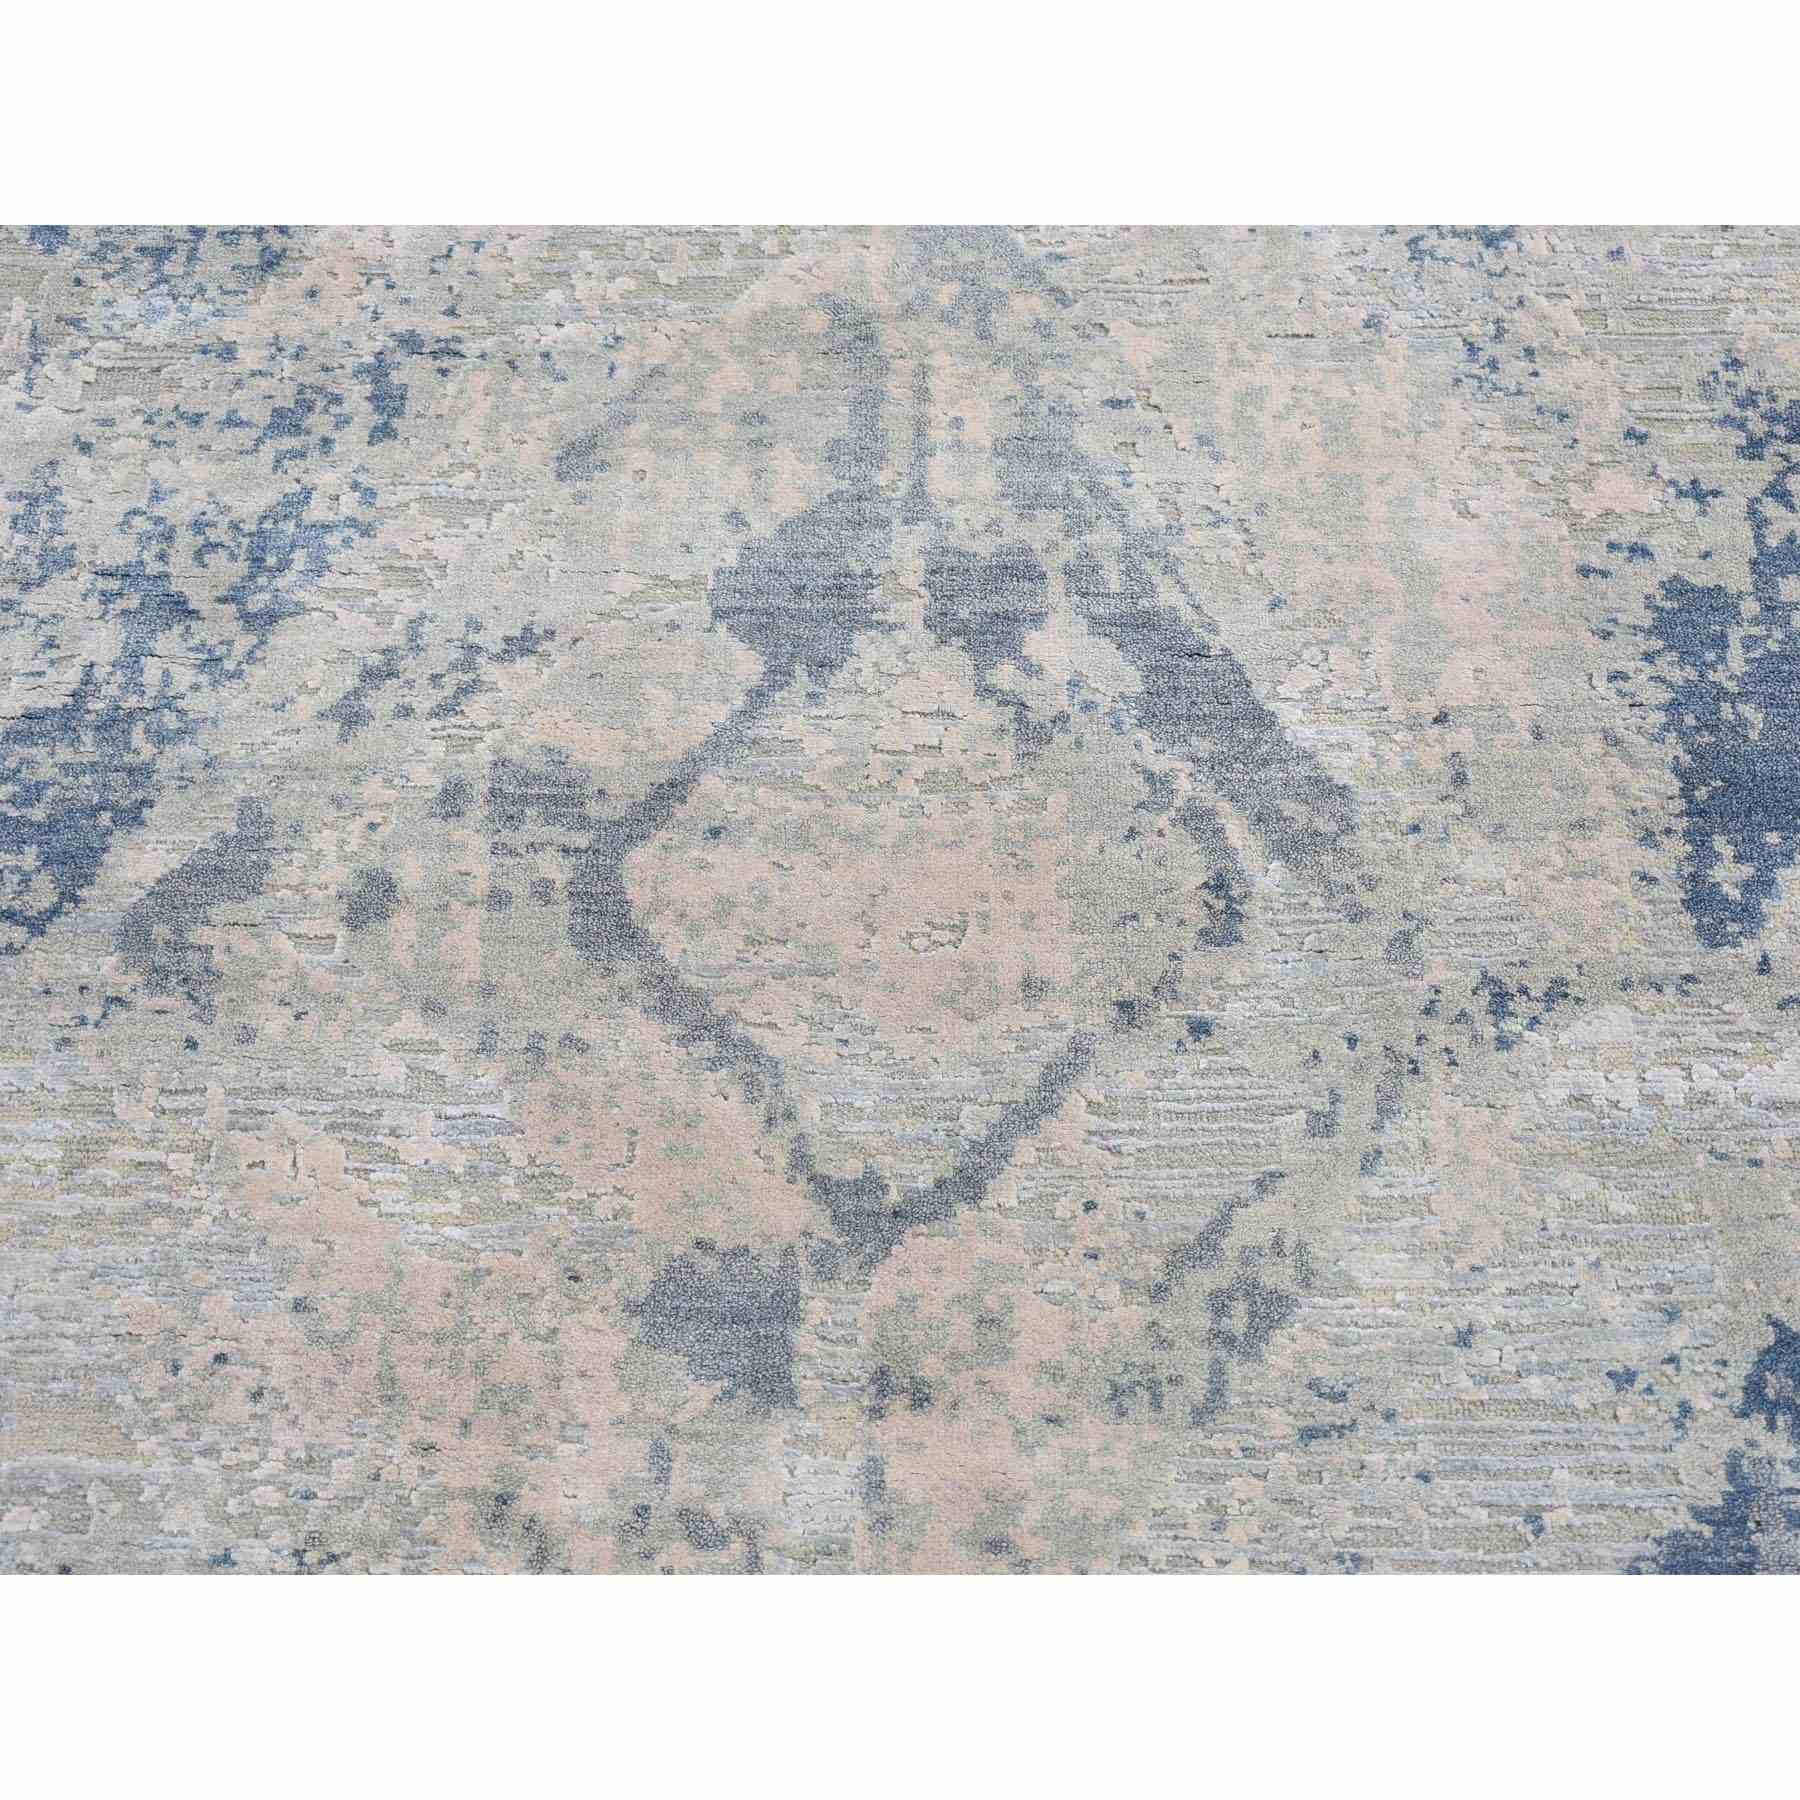 Wool-and-Silk-Hand-Knotted-Rug-331900